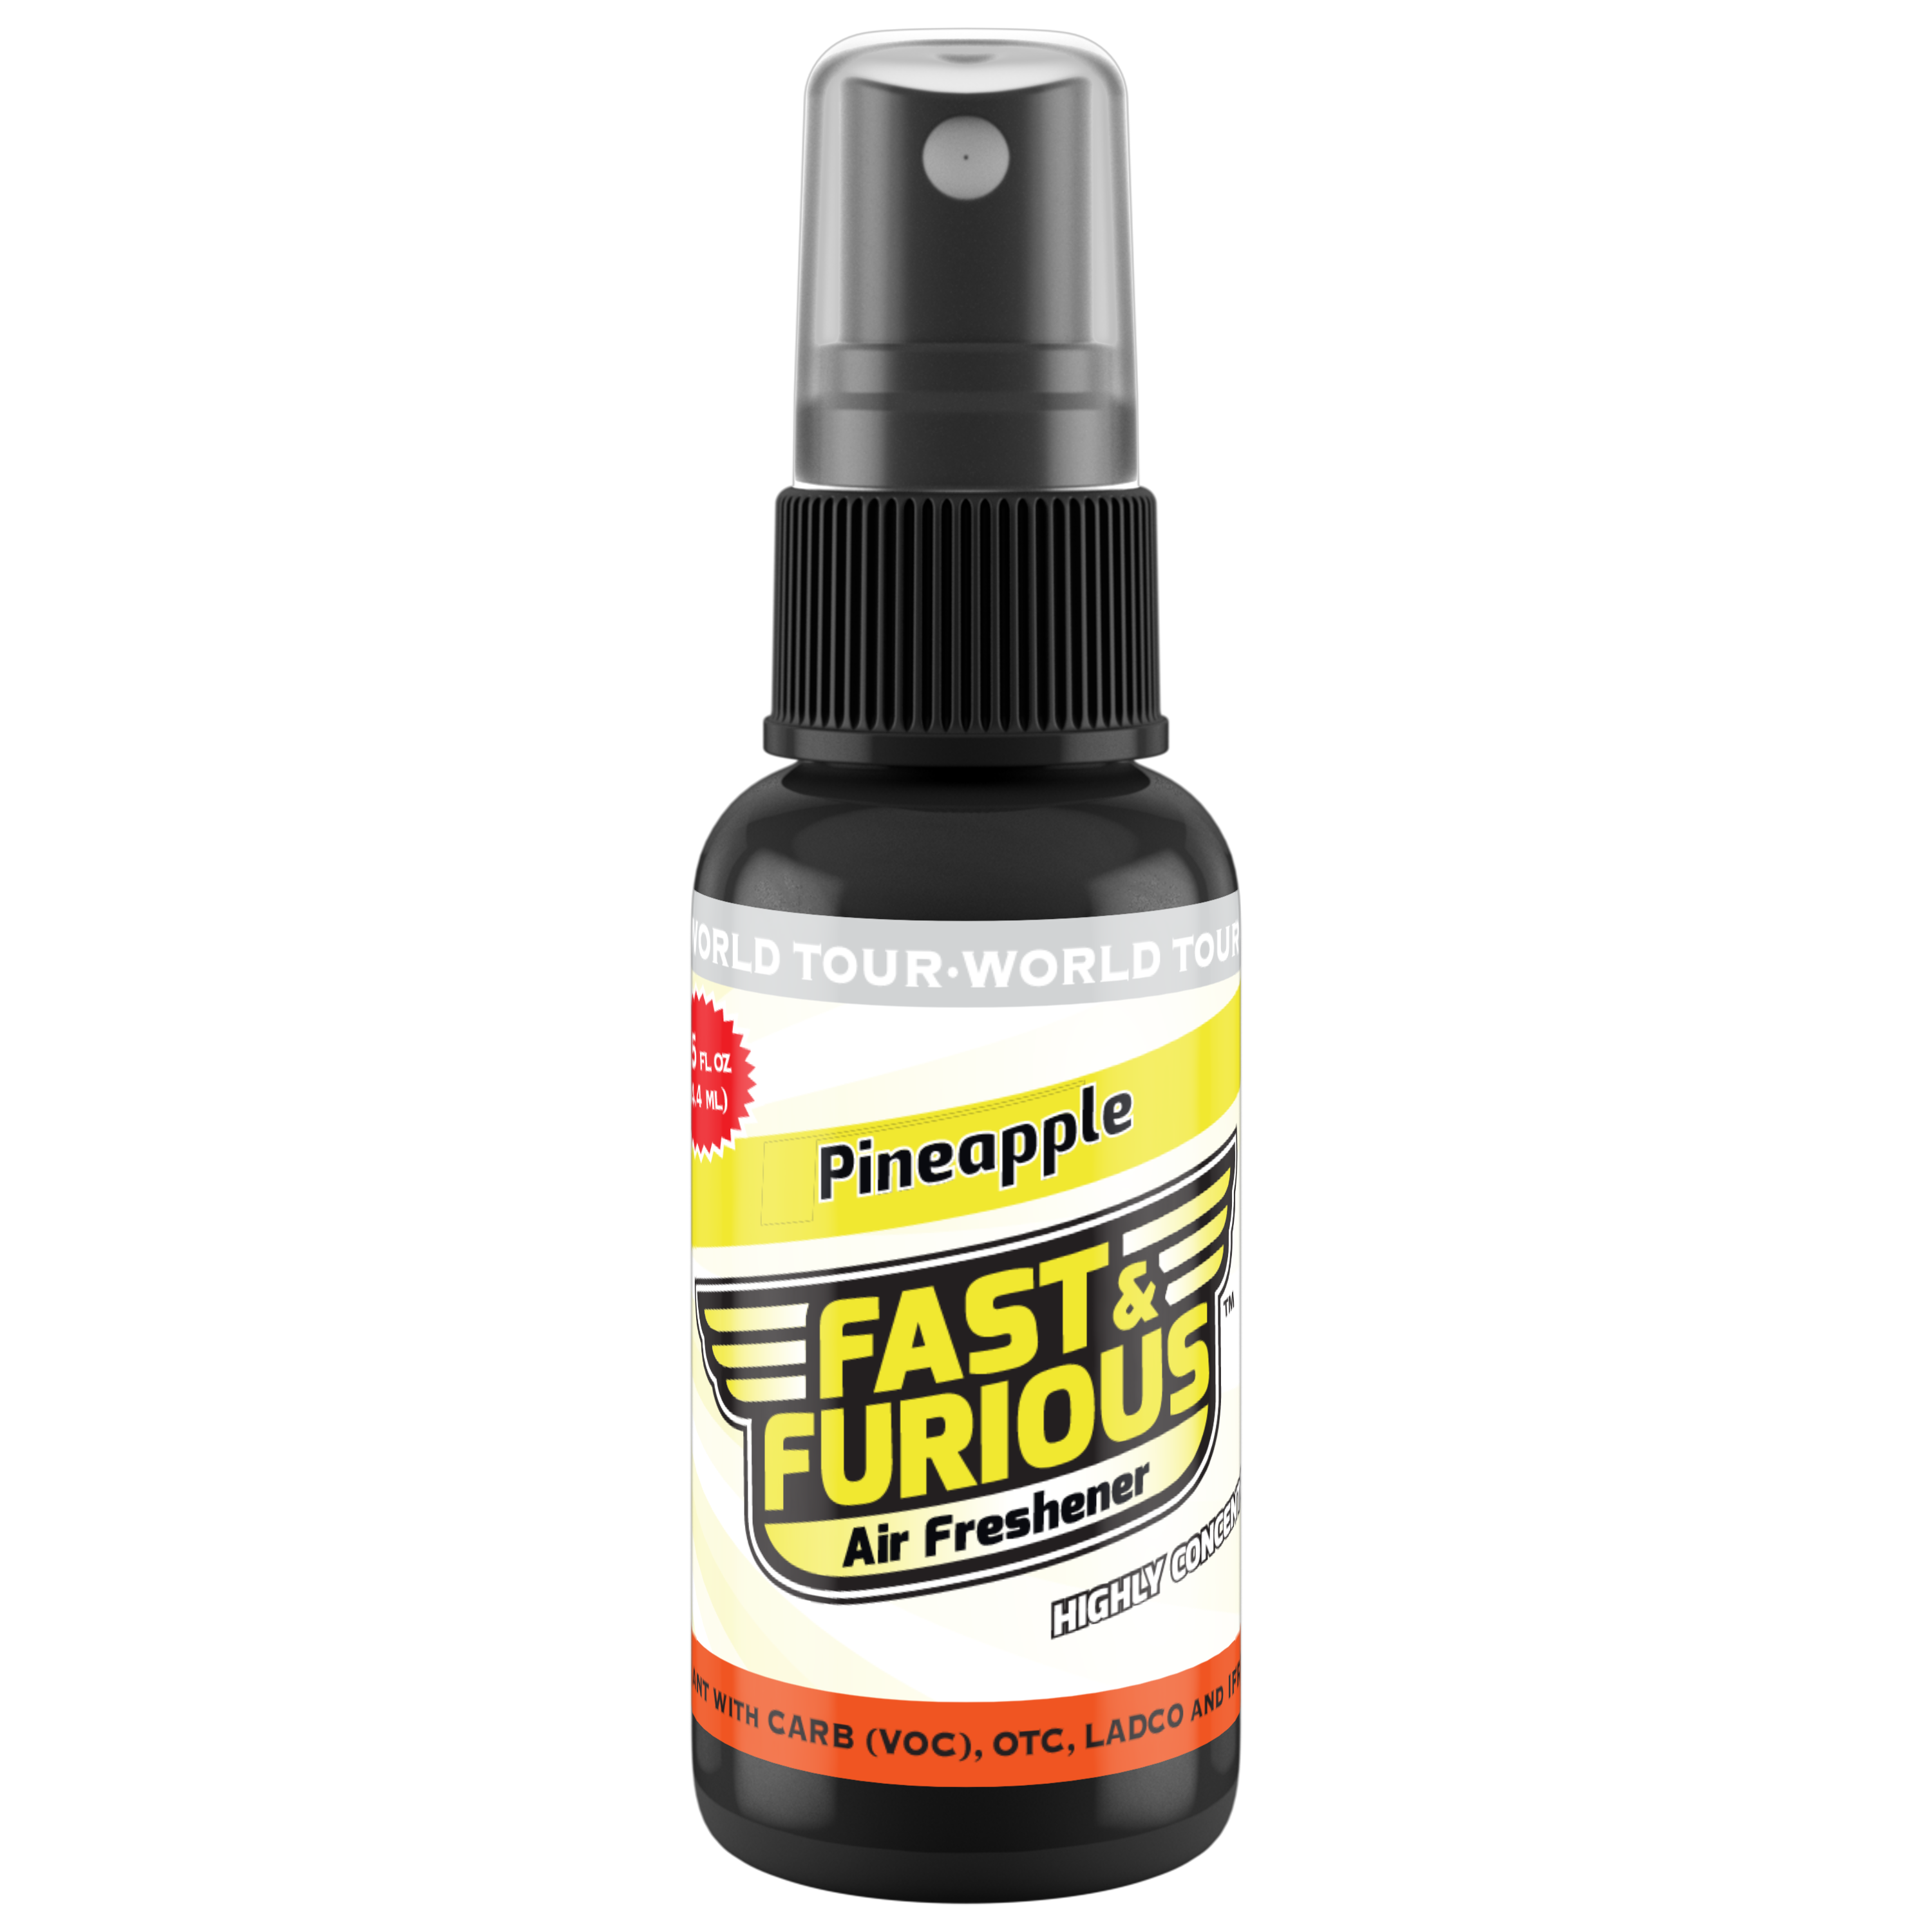 Fast and Furious Air Freshener - Pineapple Scent Size: 1.5oz